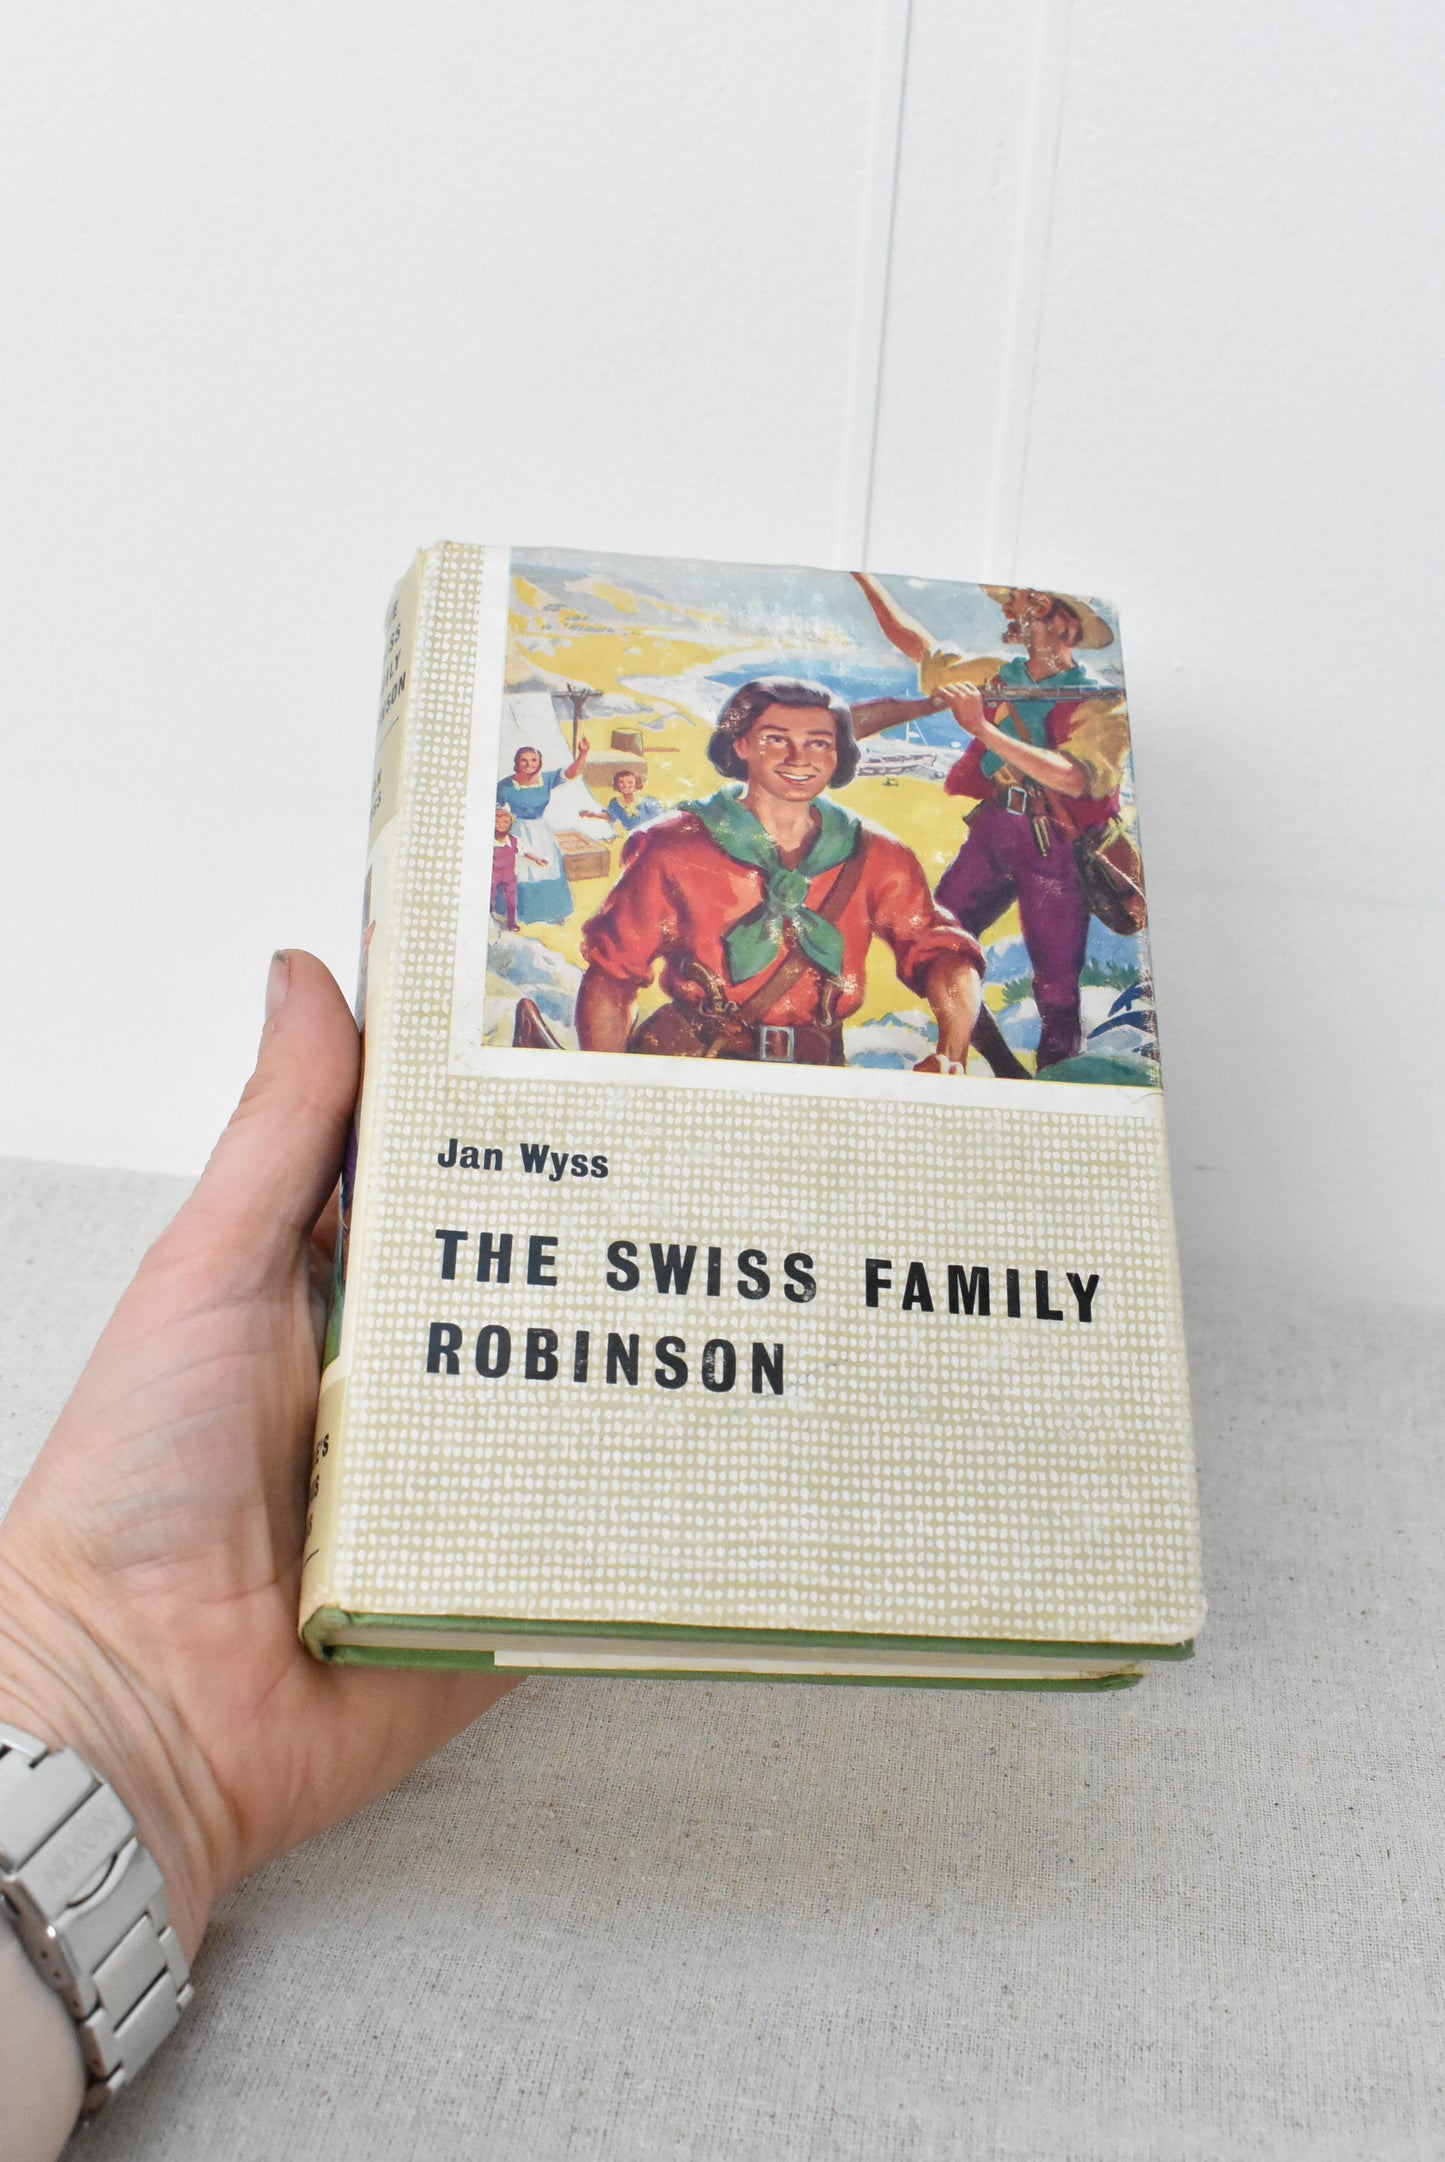 Vintage 'The Swiss Family Robinson' gifted in 1963